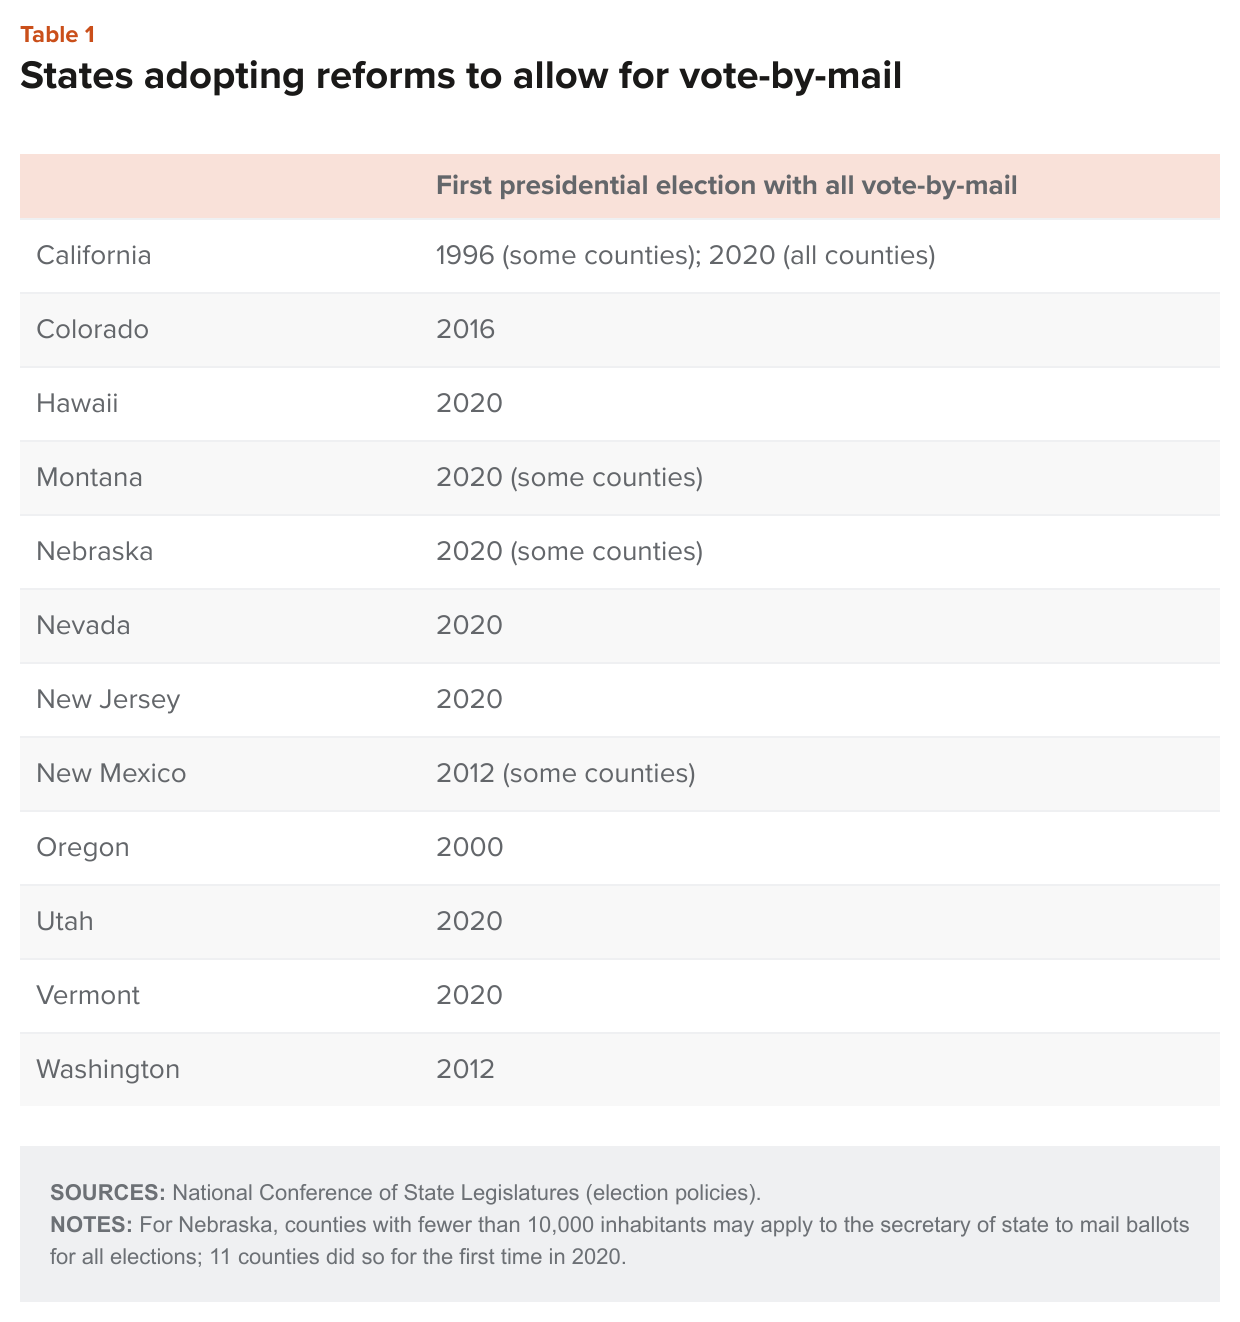 table 1 - States adopting reforms to allow for vote-by-mail